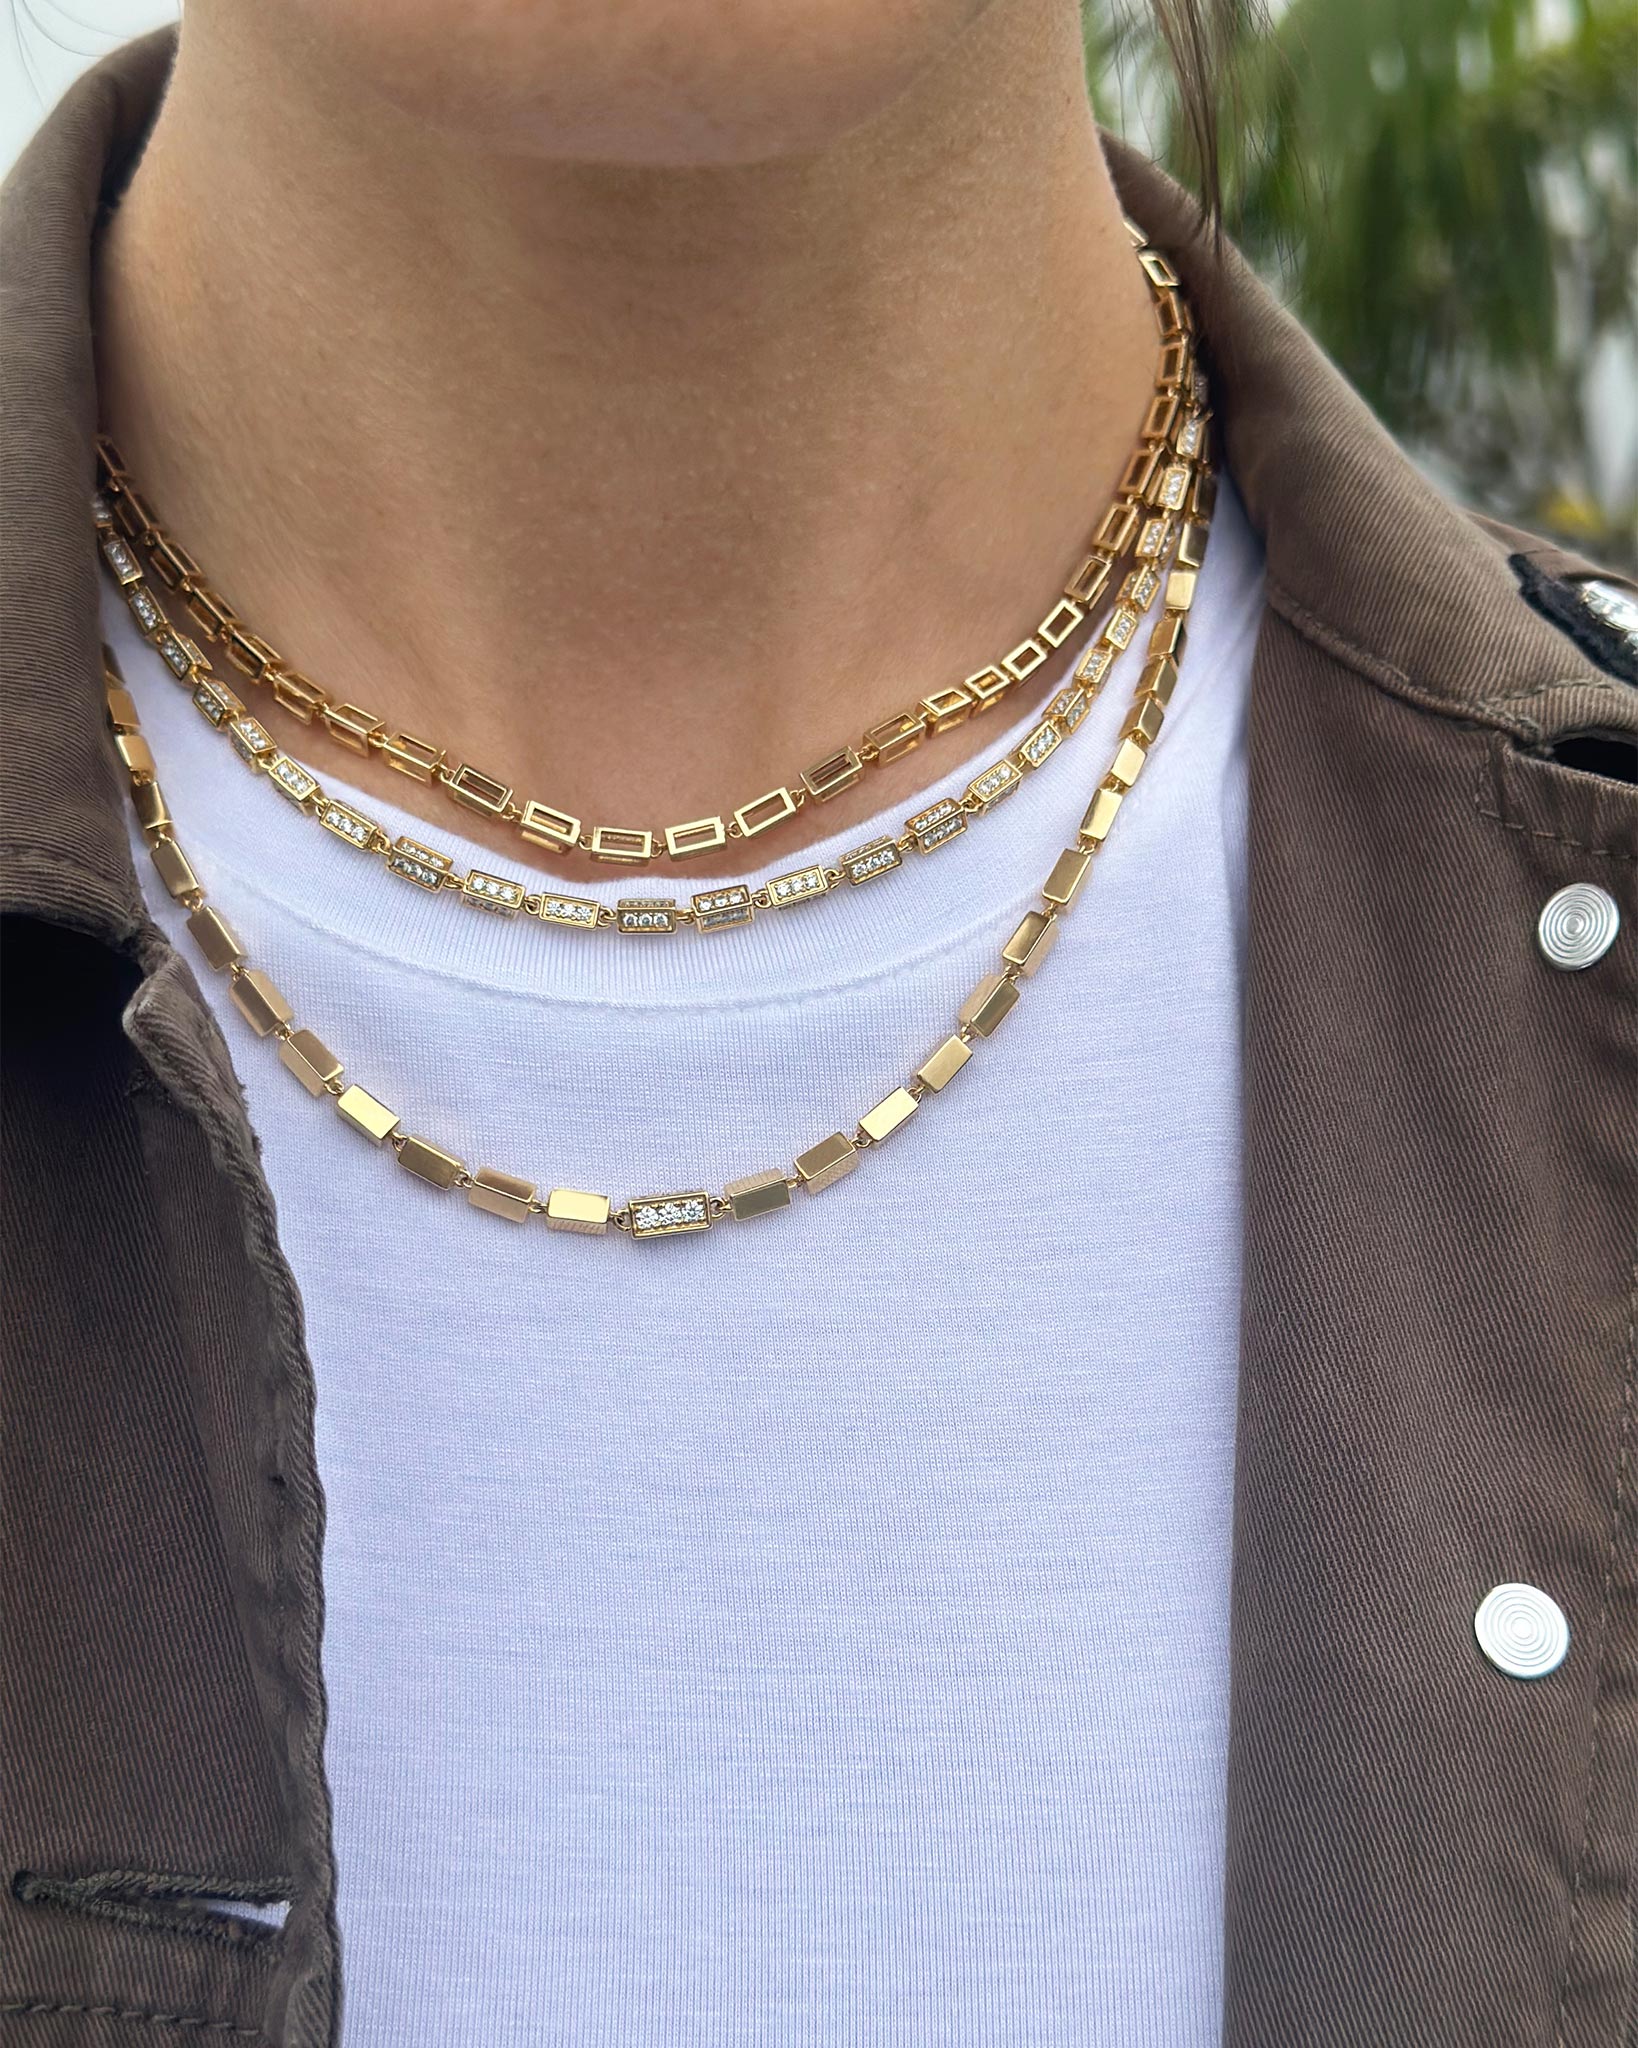 Suzanne Kalan model styling three Block-Chain necklaces in 18k yellow gold